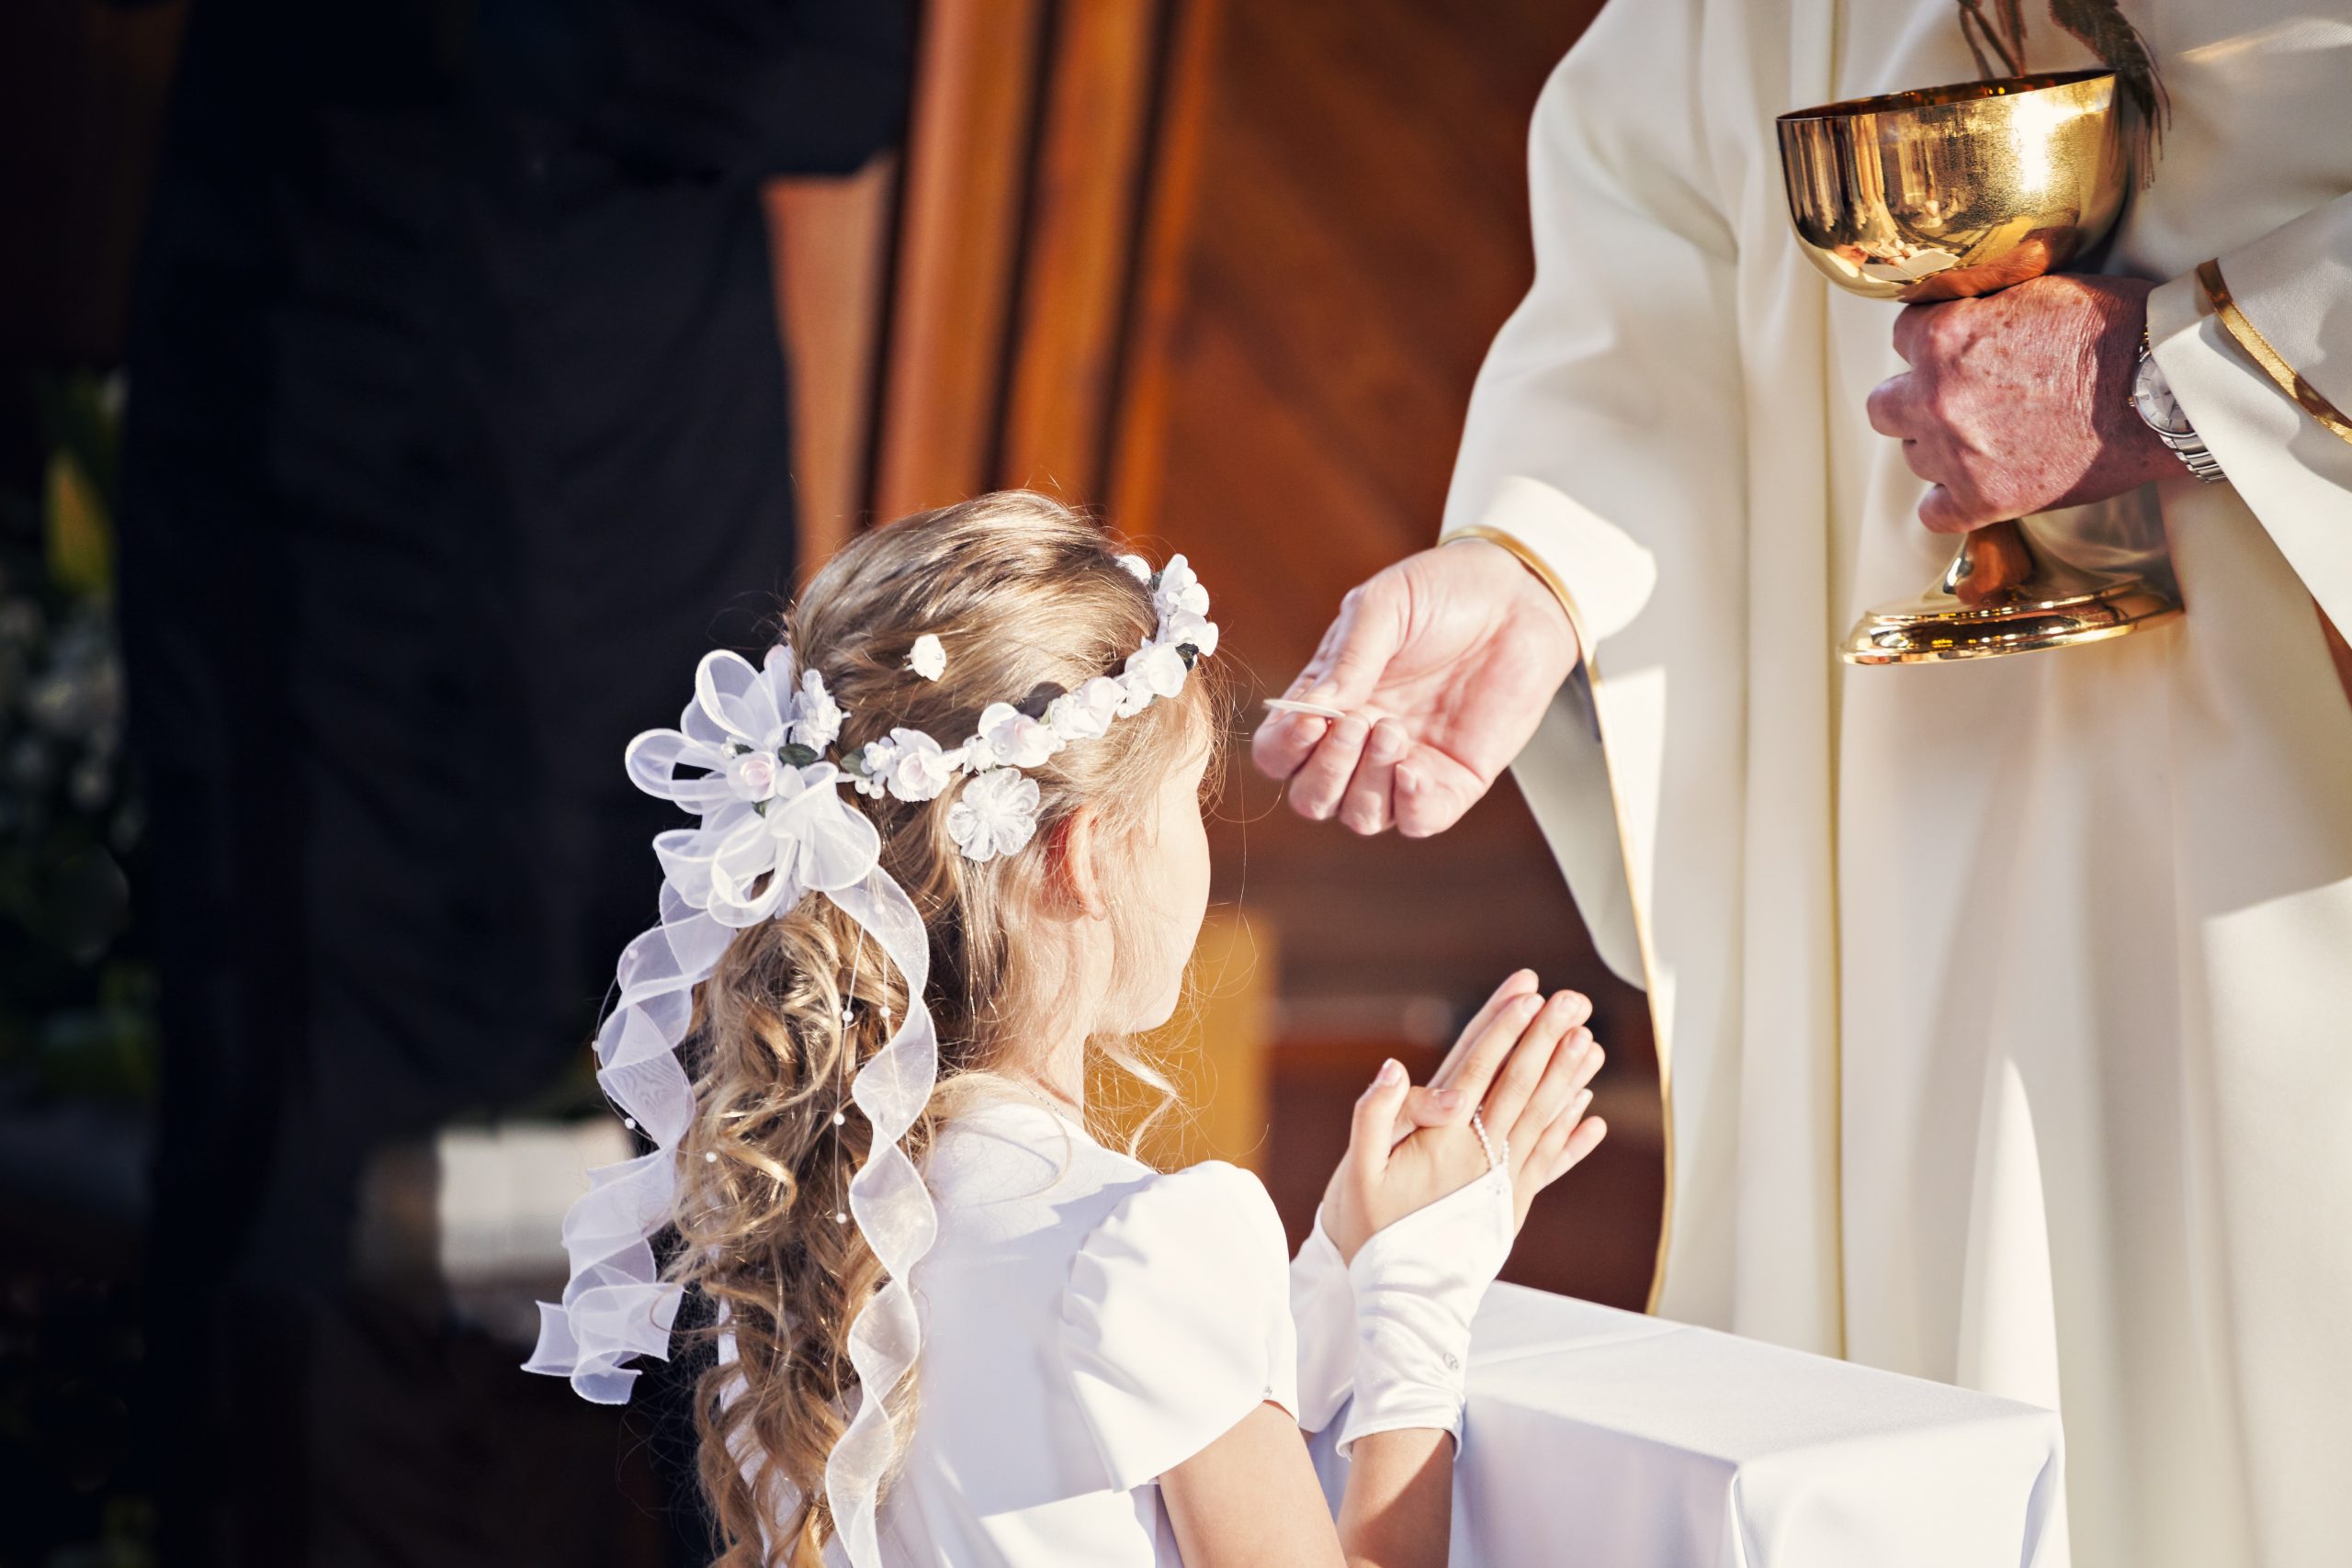 Communion and clergyman. Priest holds Holy Communion in his hands. Priest gives the Body of Christ during the First Holy Communion